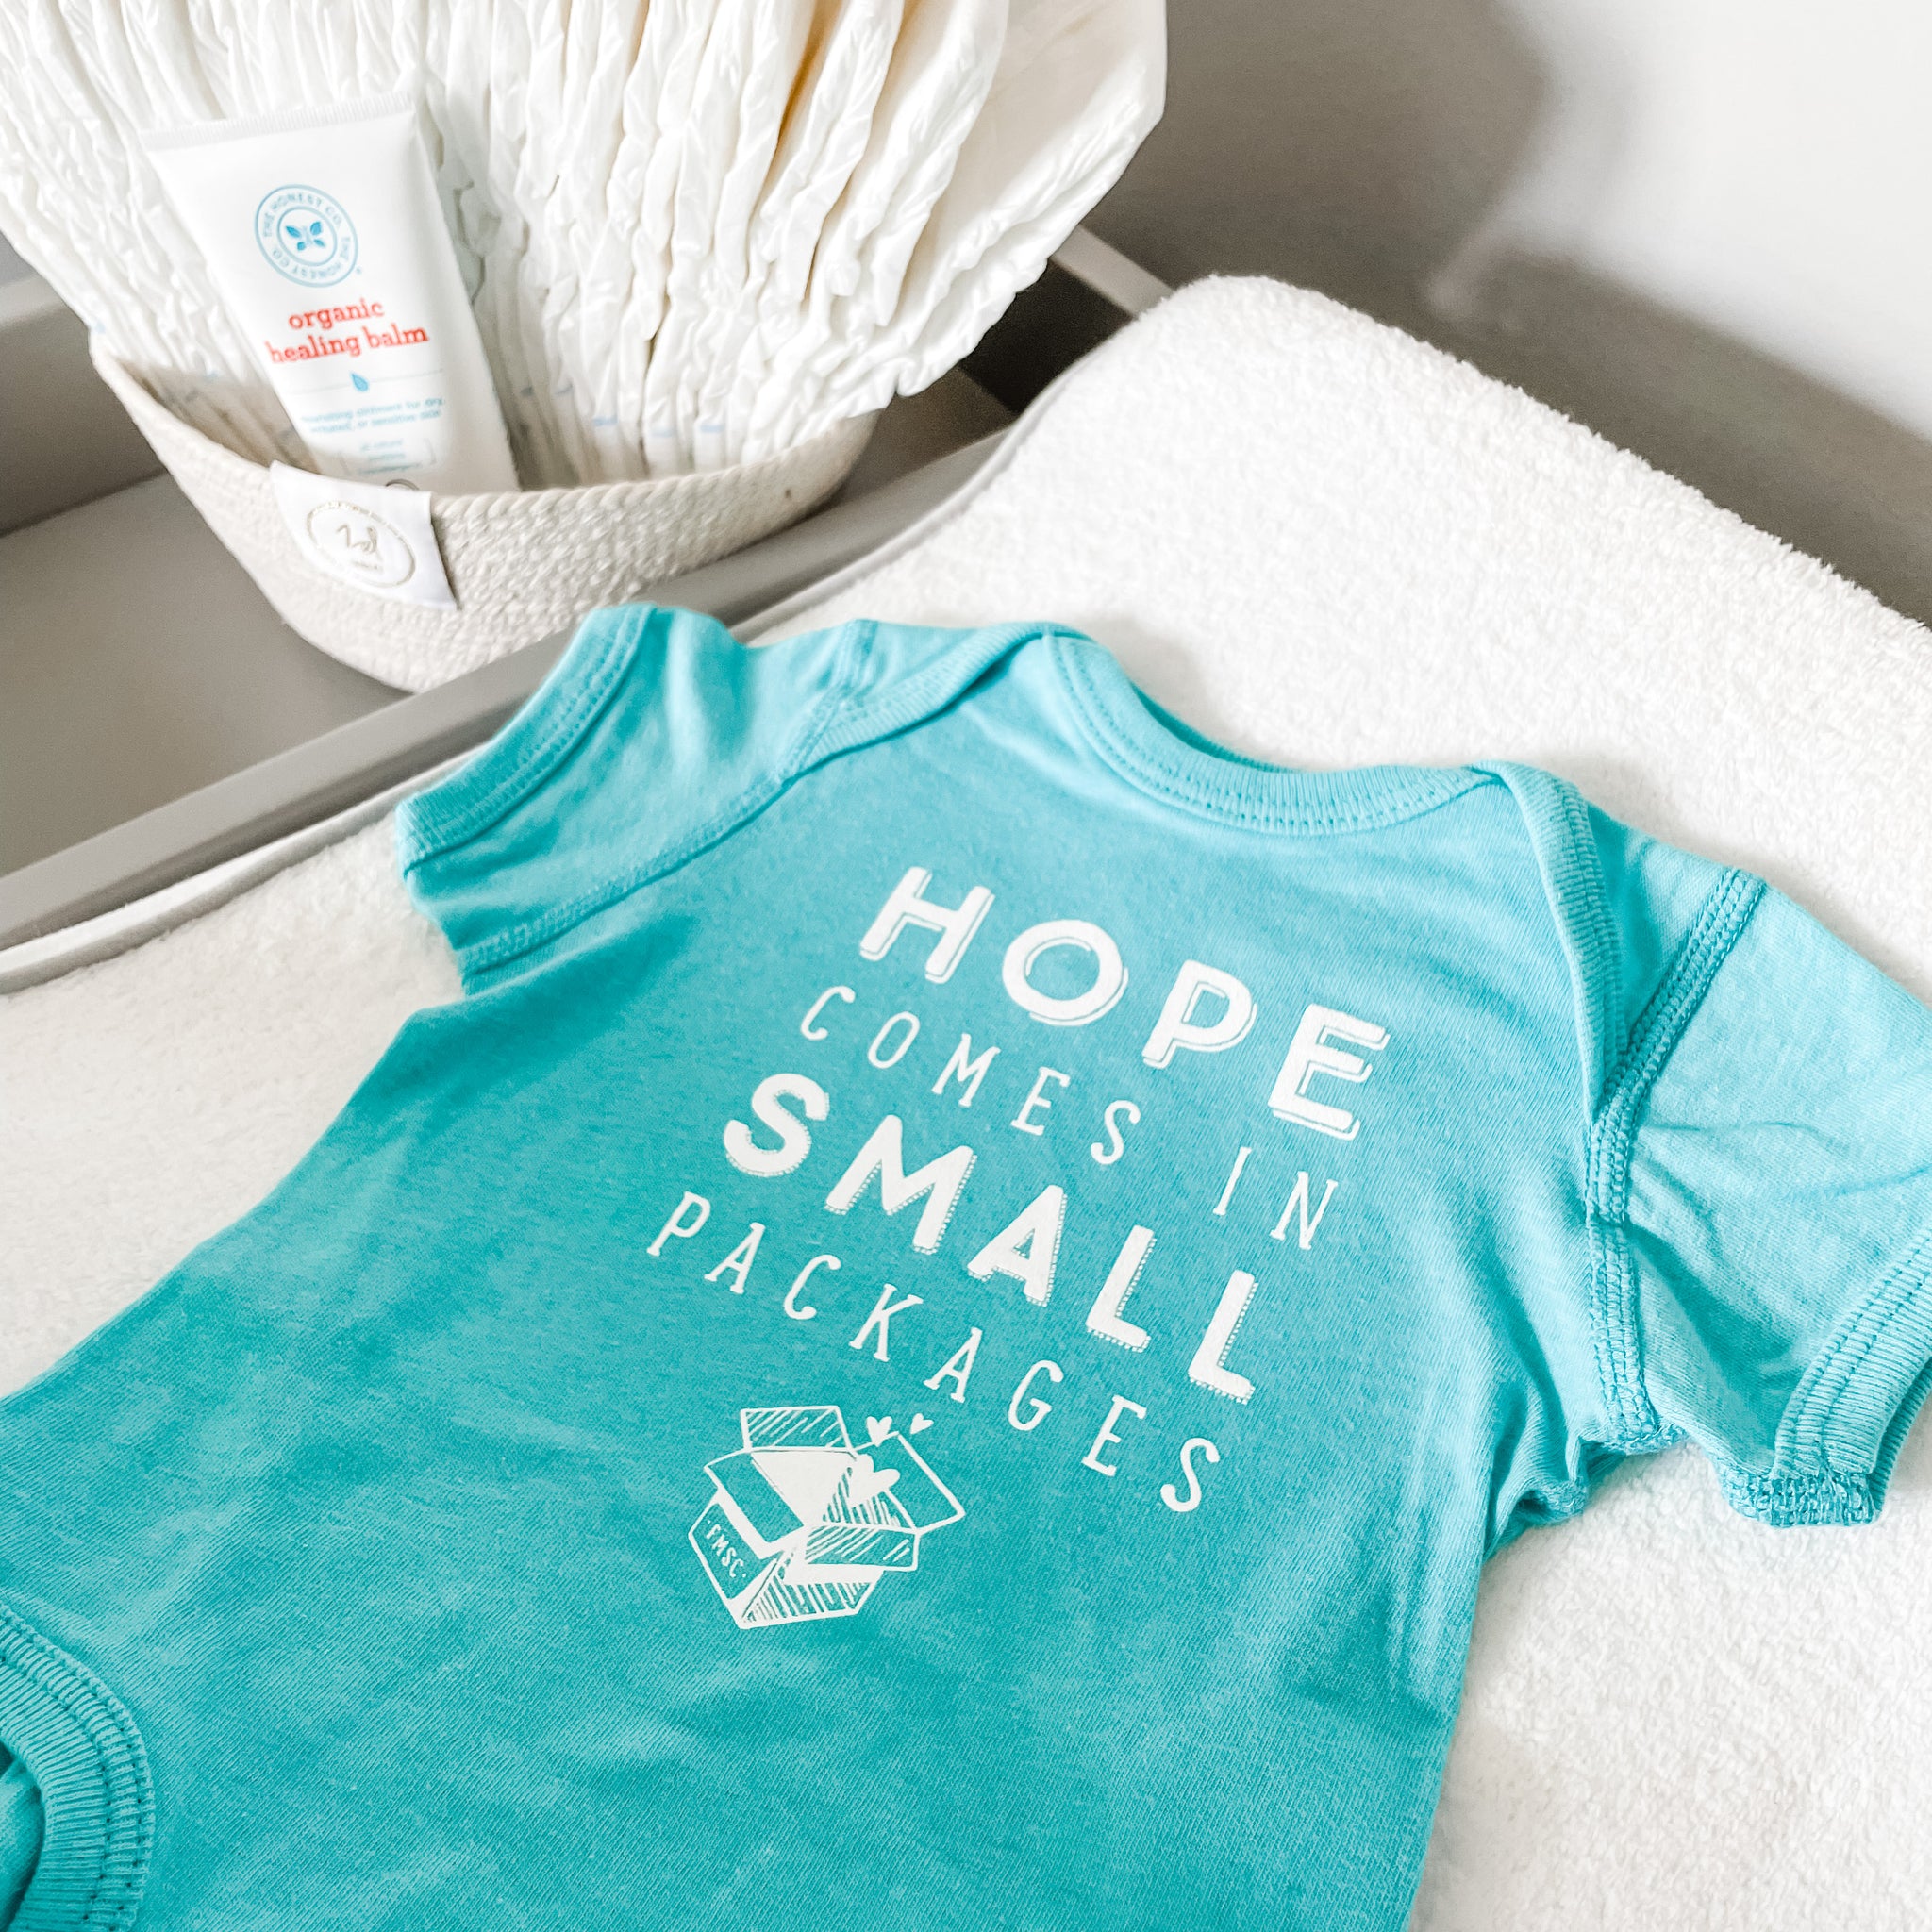 Hope Comes in Small Packages Onesie - Teal - FMSCMarketplace.org